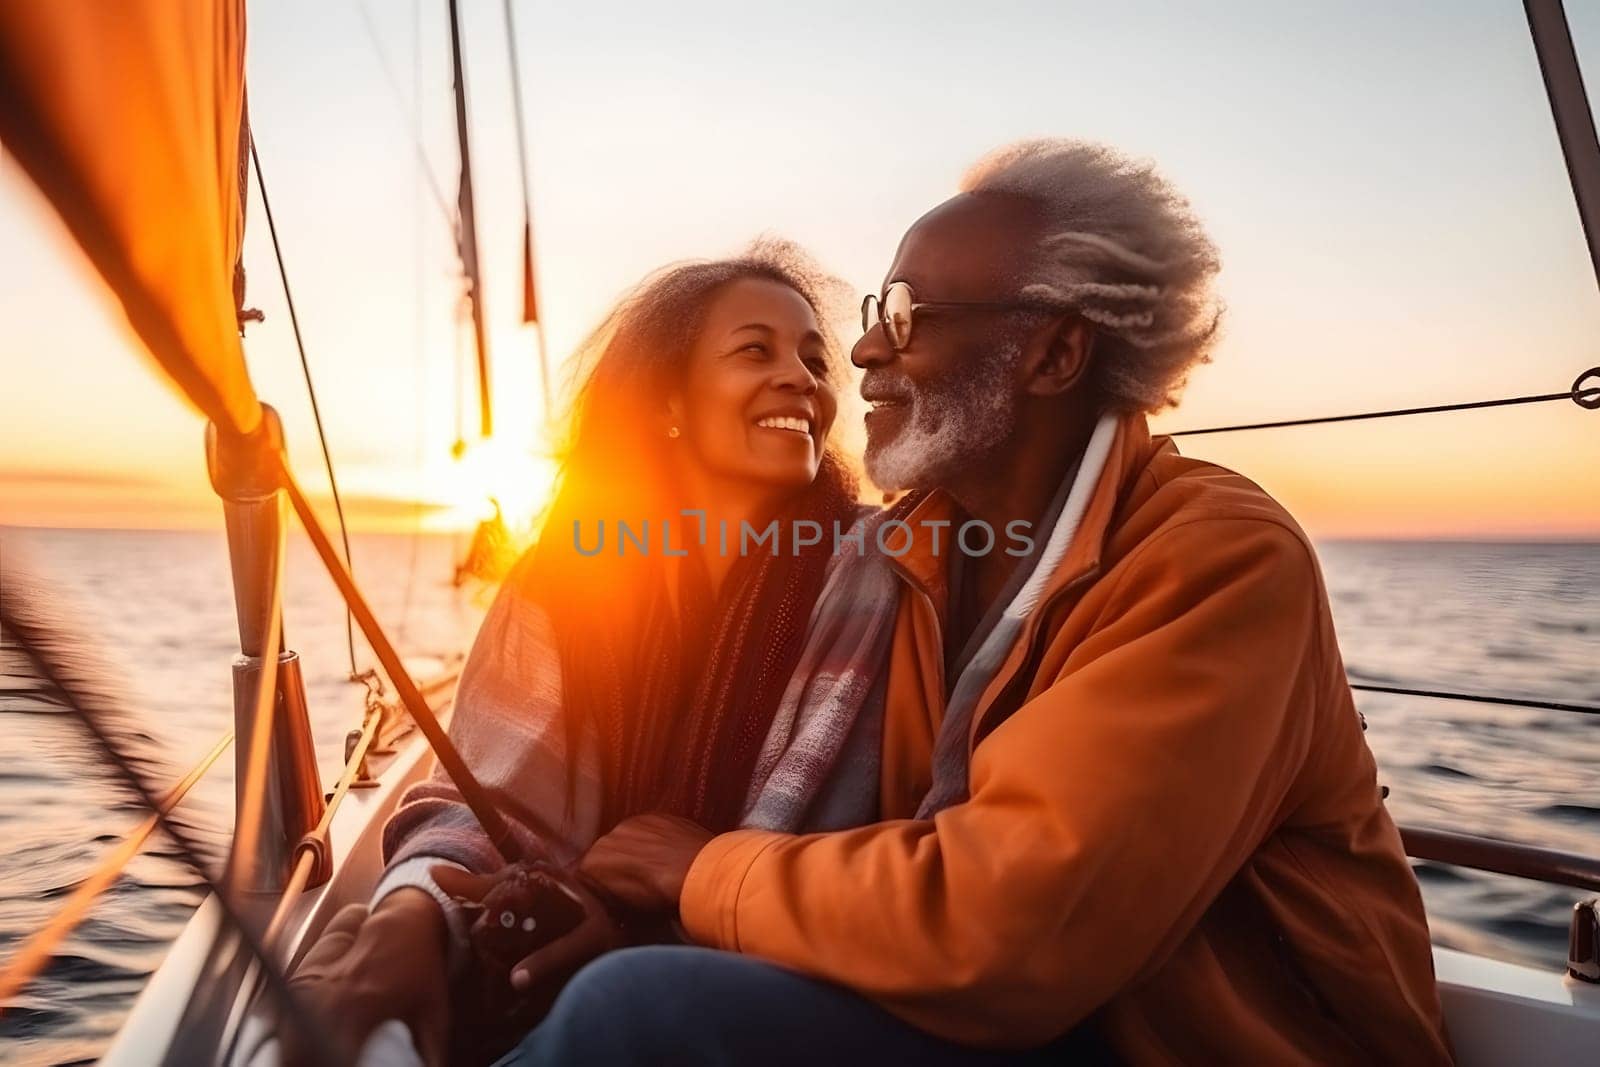 Beautiful and happy senior african american couple on a sailboat at sunset or sunrise, neural network generated image by z1b